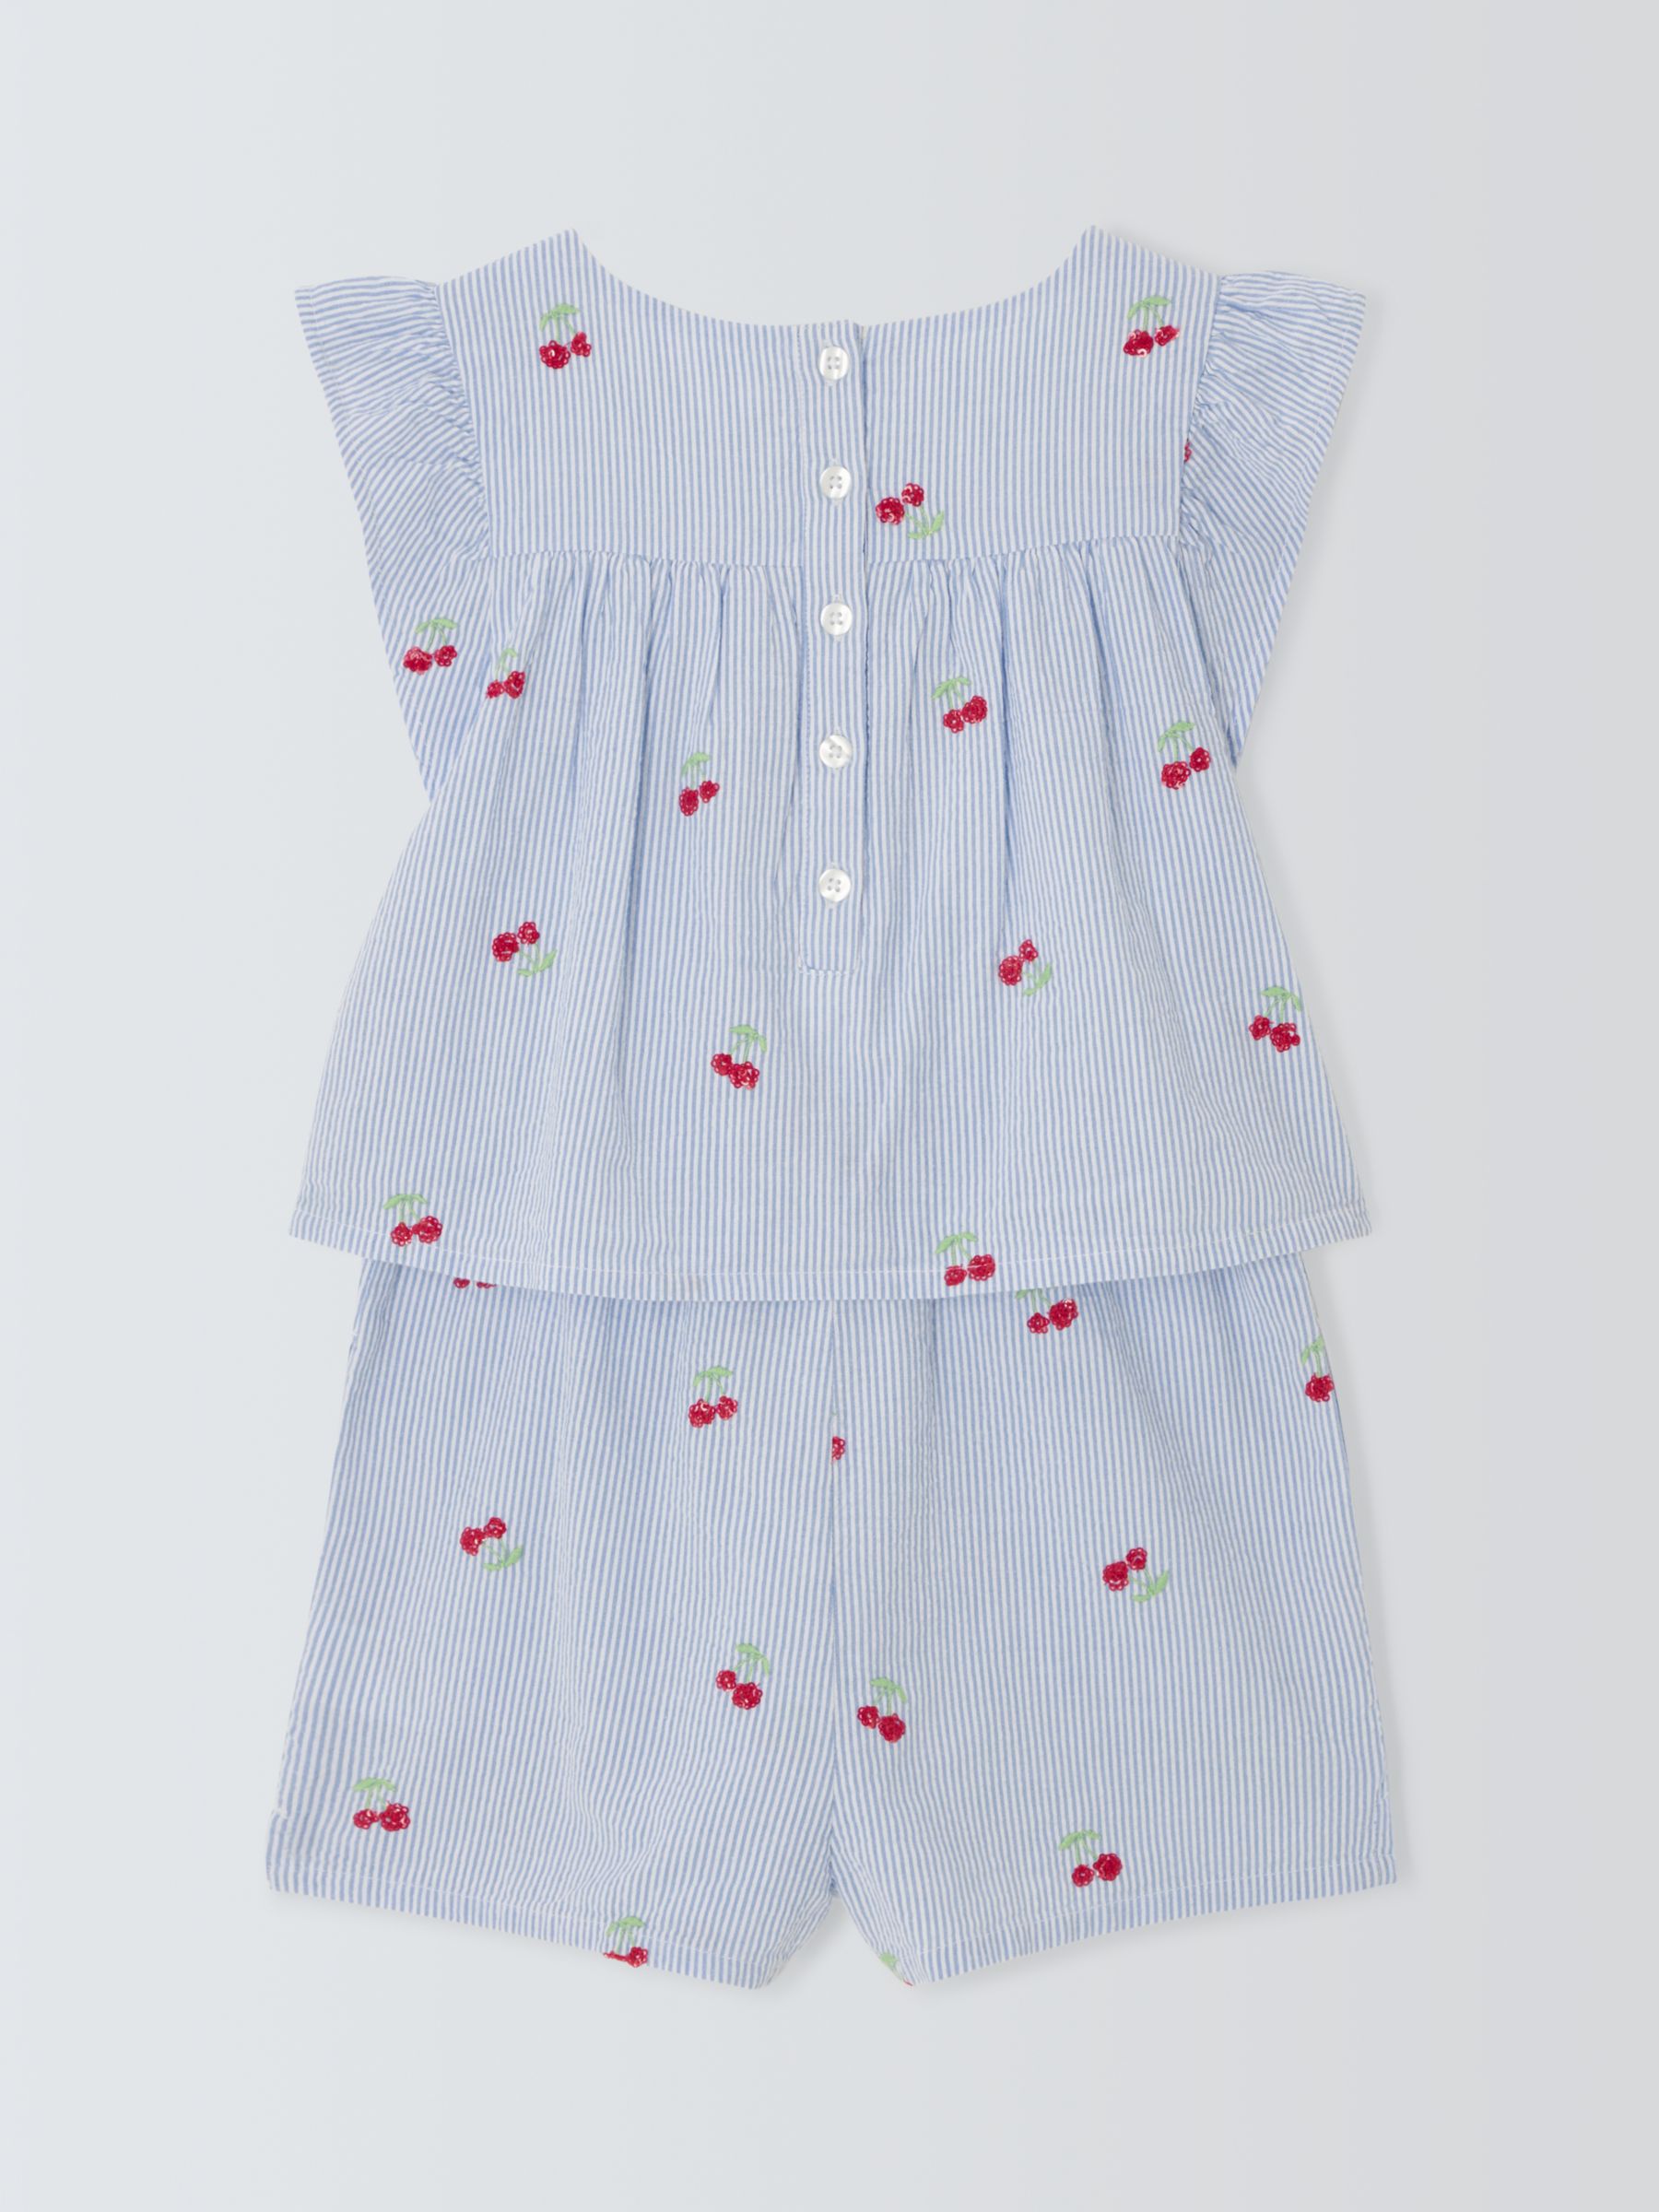 John Lewis Kids' Embroidered Cherry Stripe Print Playsuit, Blue/White, 9 years